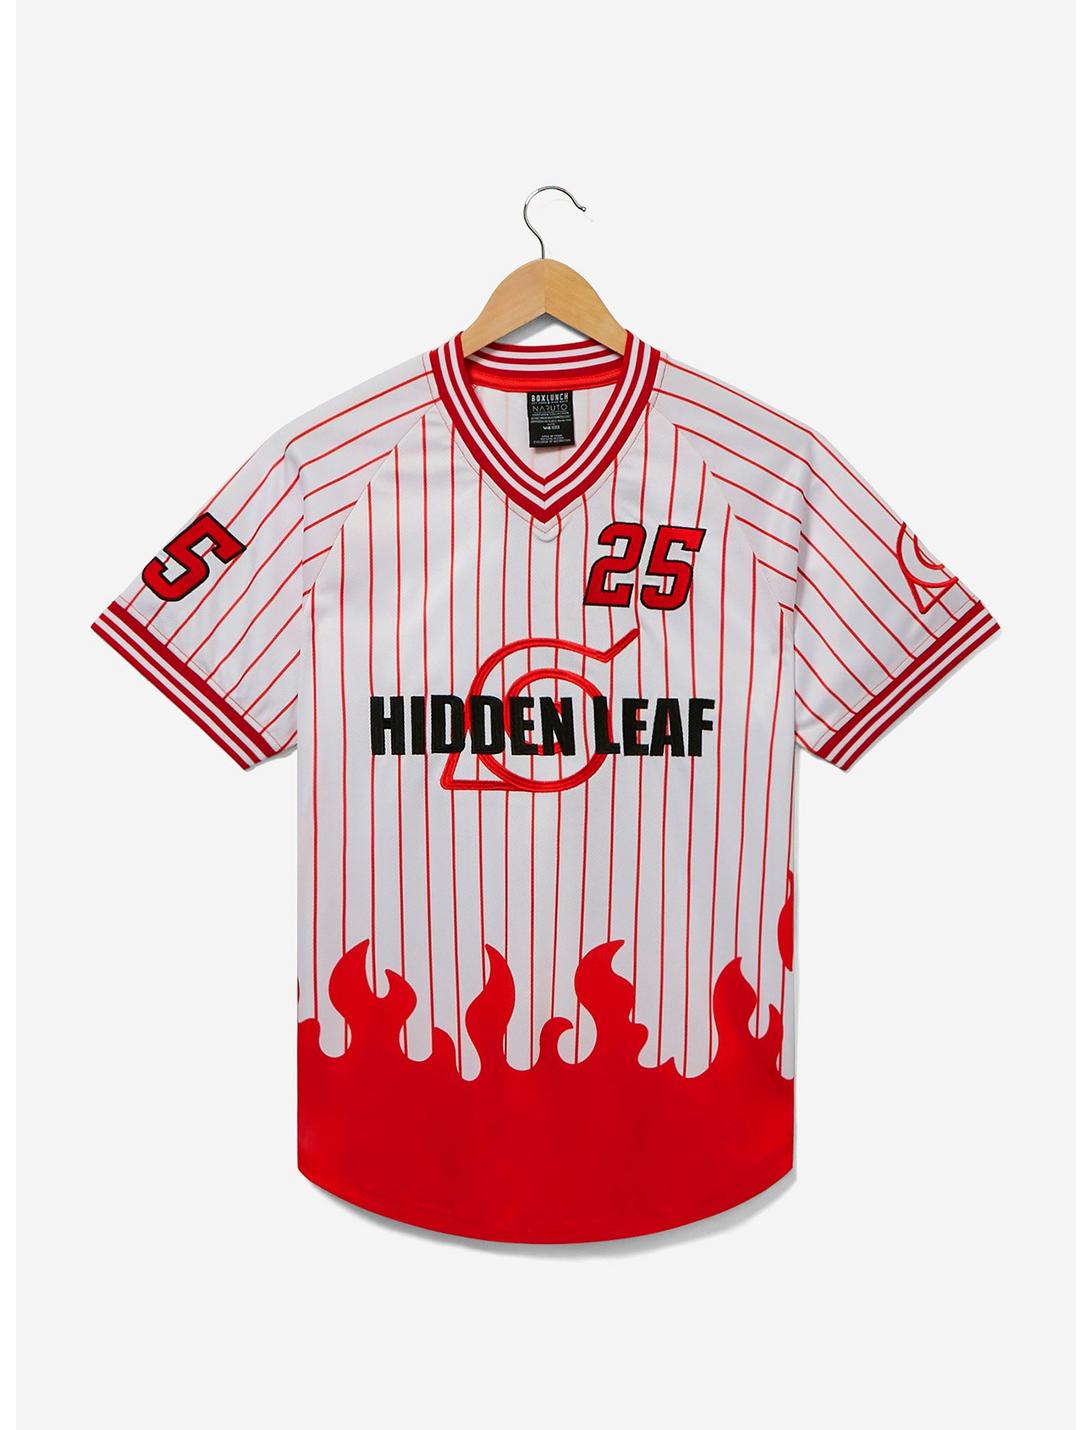 Naruto Shippuden Hidden Leaf Minato Soccer Jersey - BoxLunch Exclusive, RED, hi-res